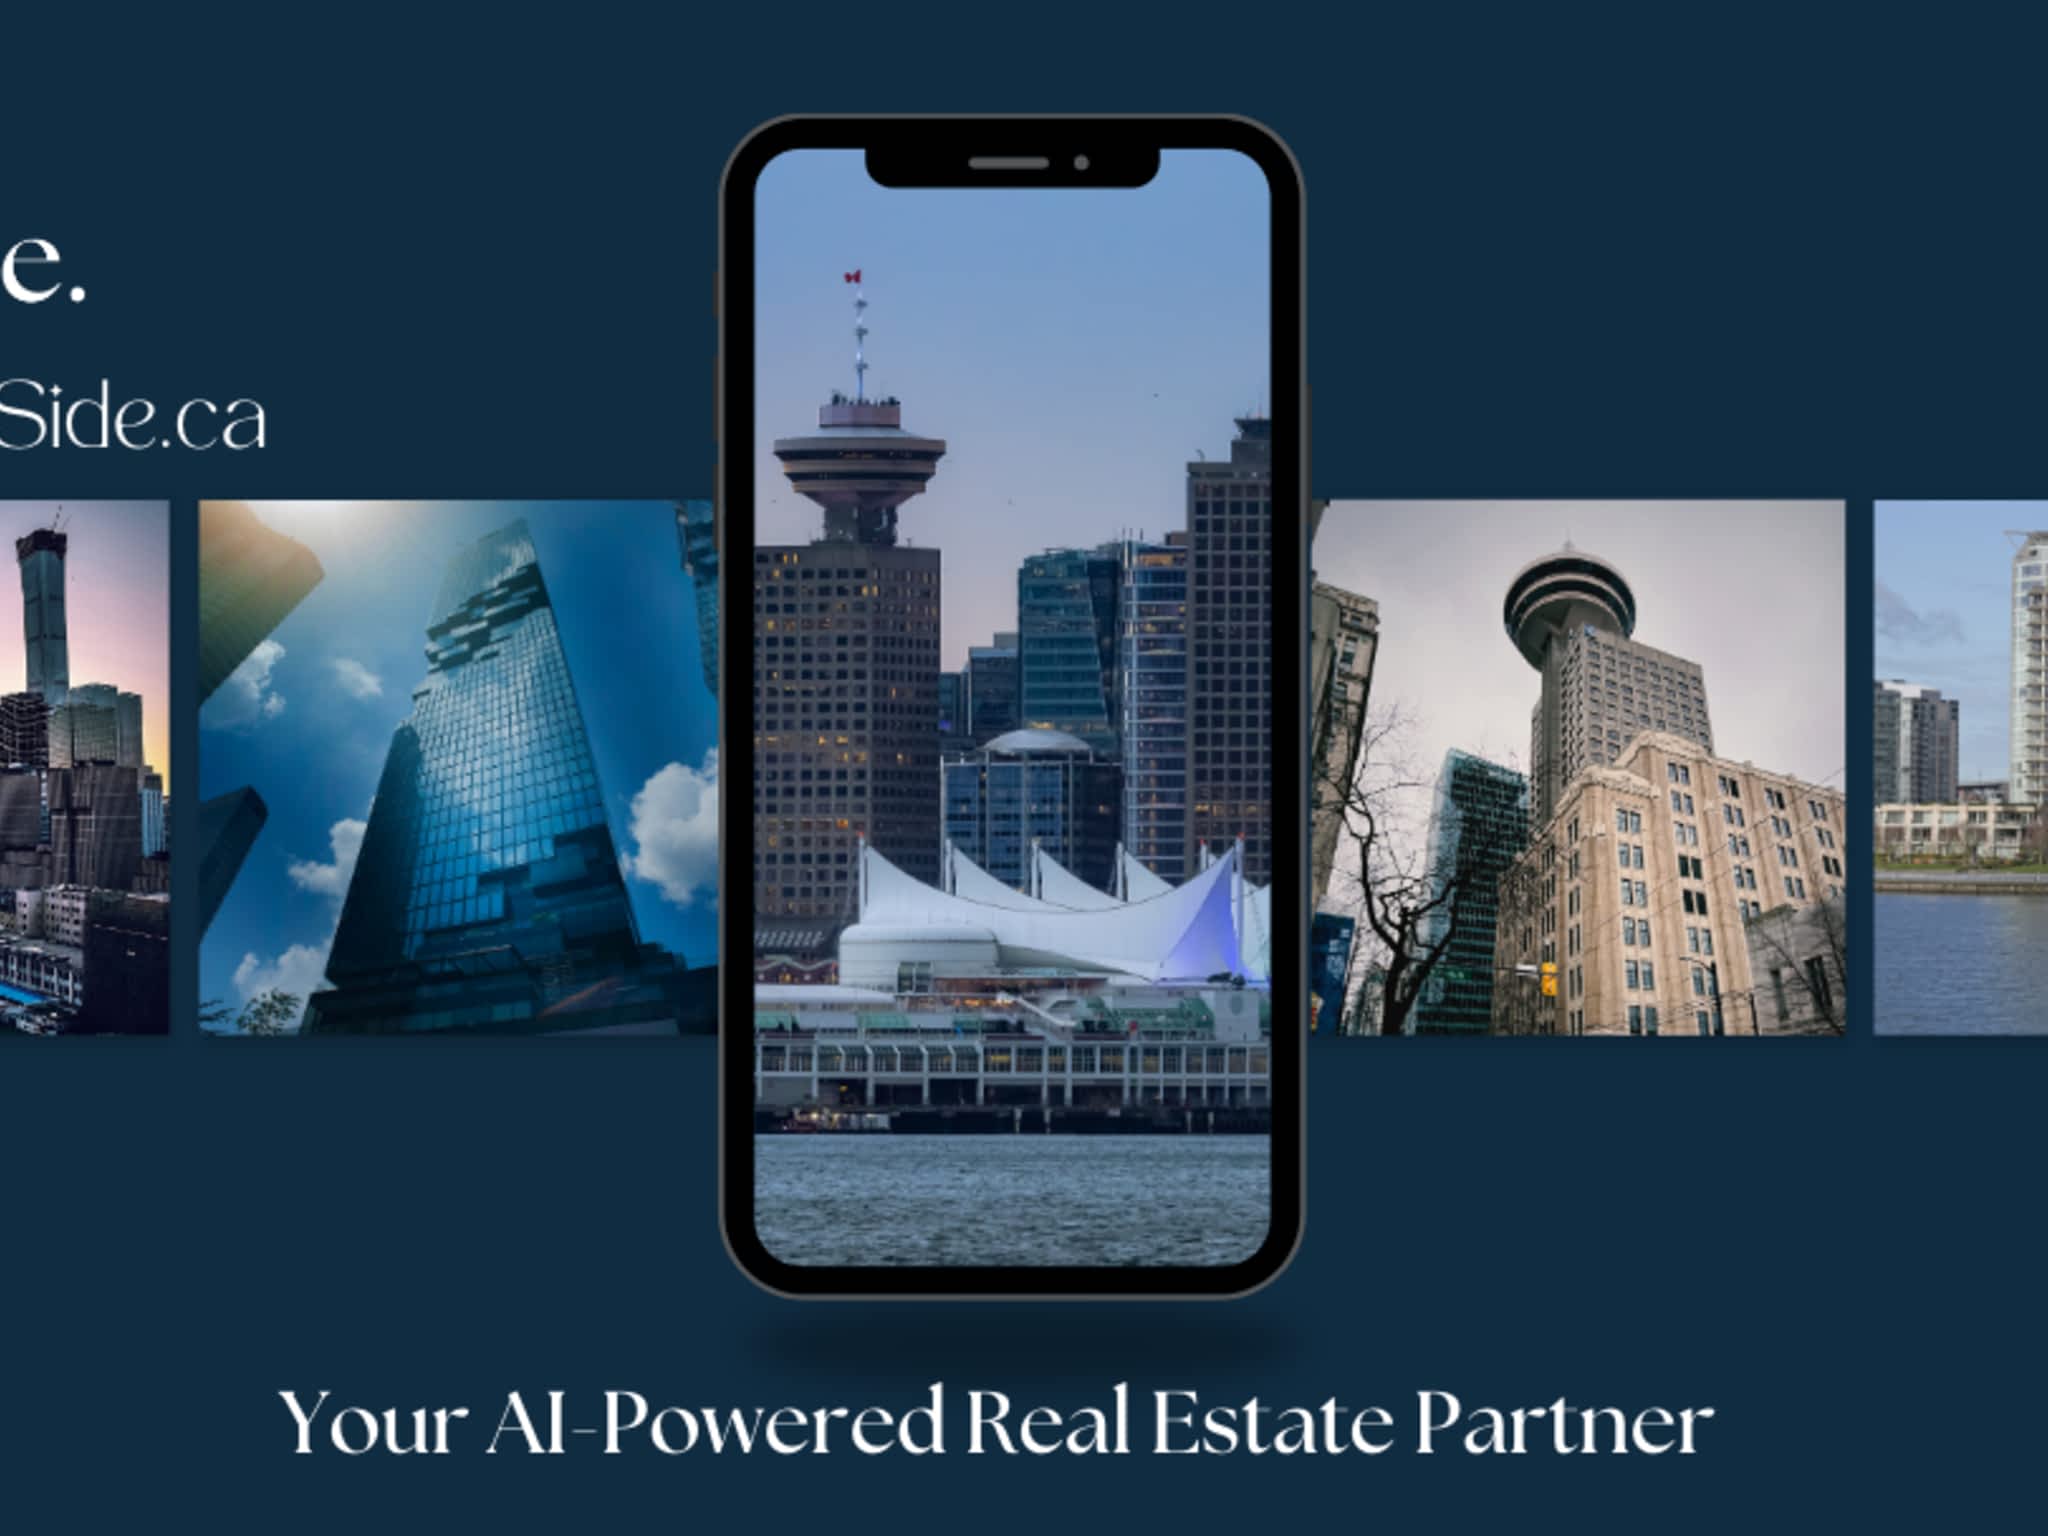 photo Side. Your AI-Powered Real Estate Partner